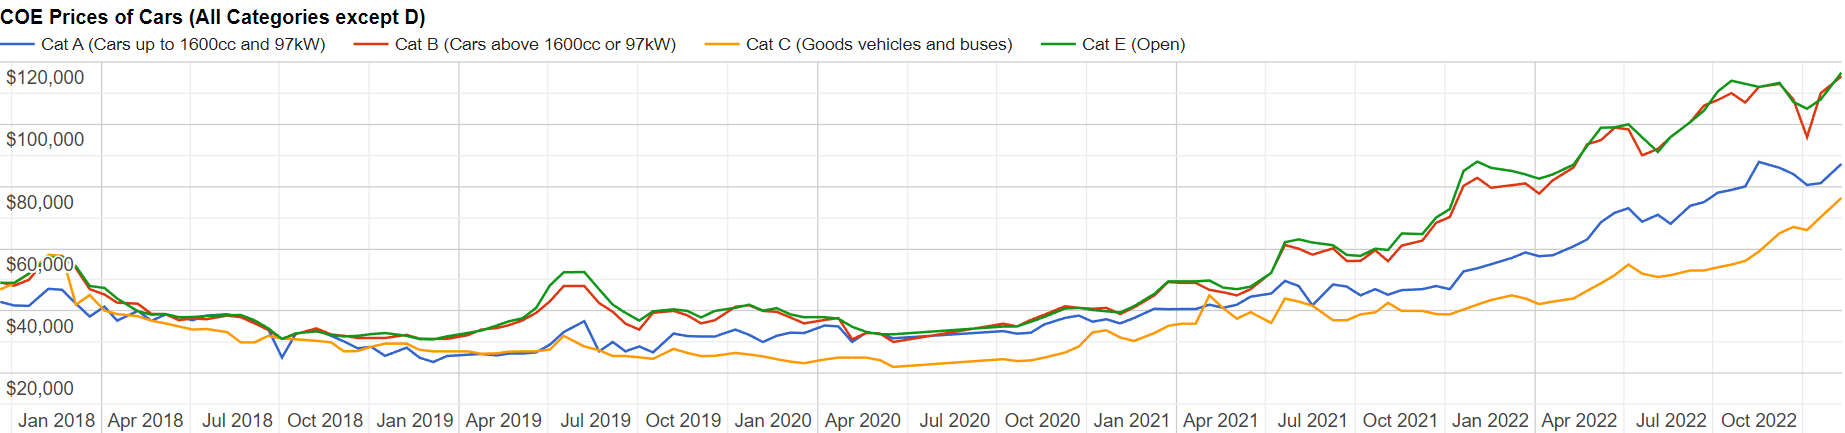 COE Prices Over The Past 4 Years